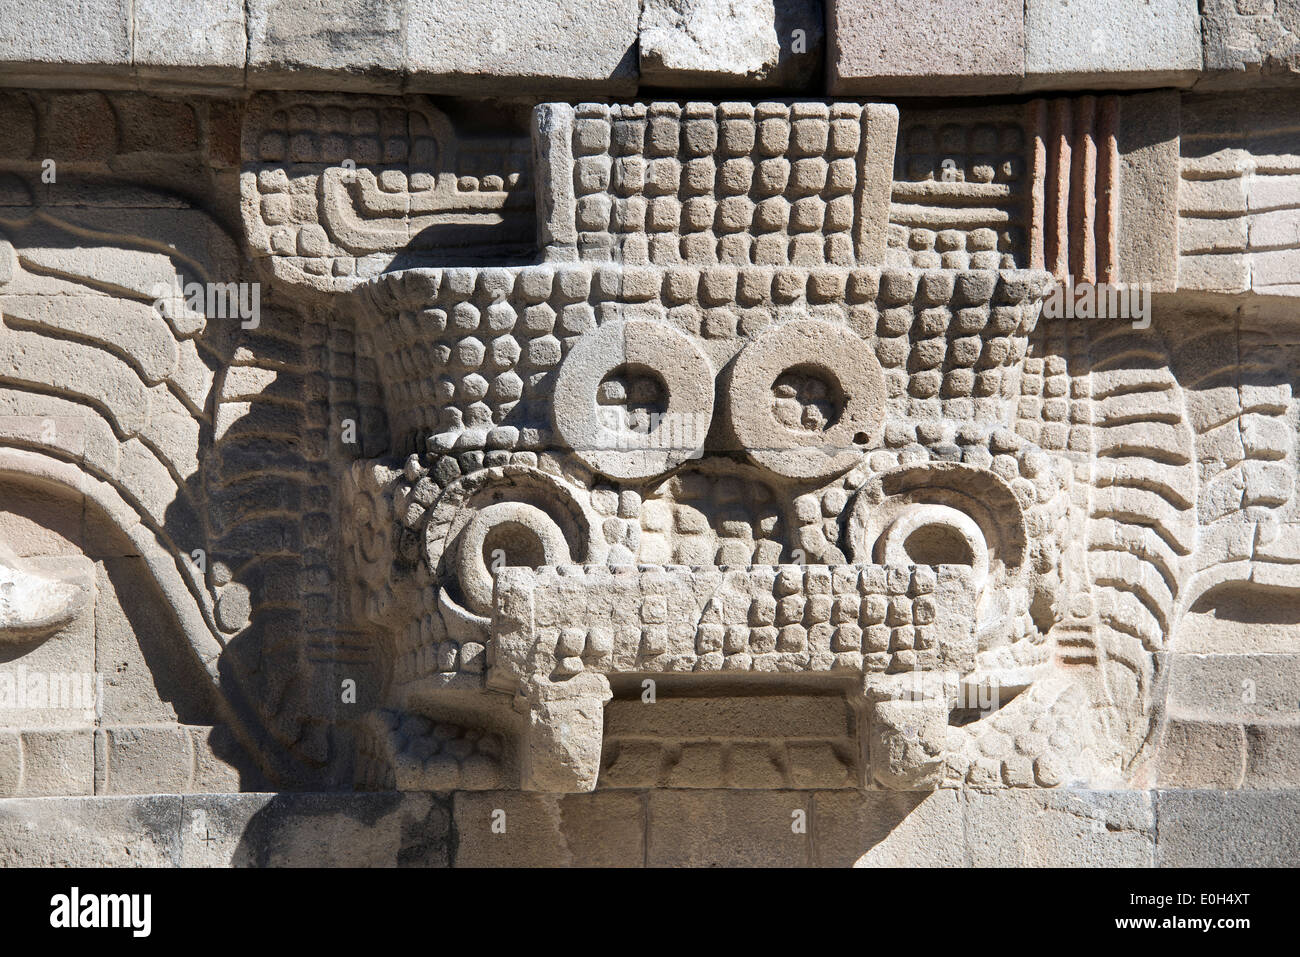 Earth monster Temple of Quetzalcoatl Teotihuacan Mexico Stock Photo